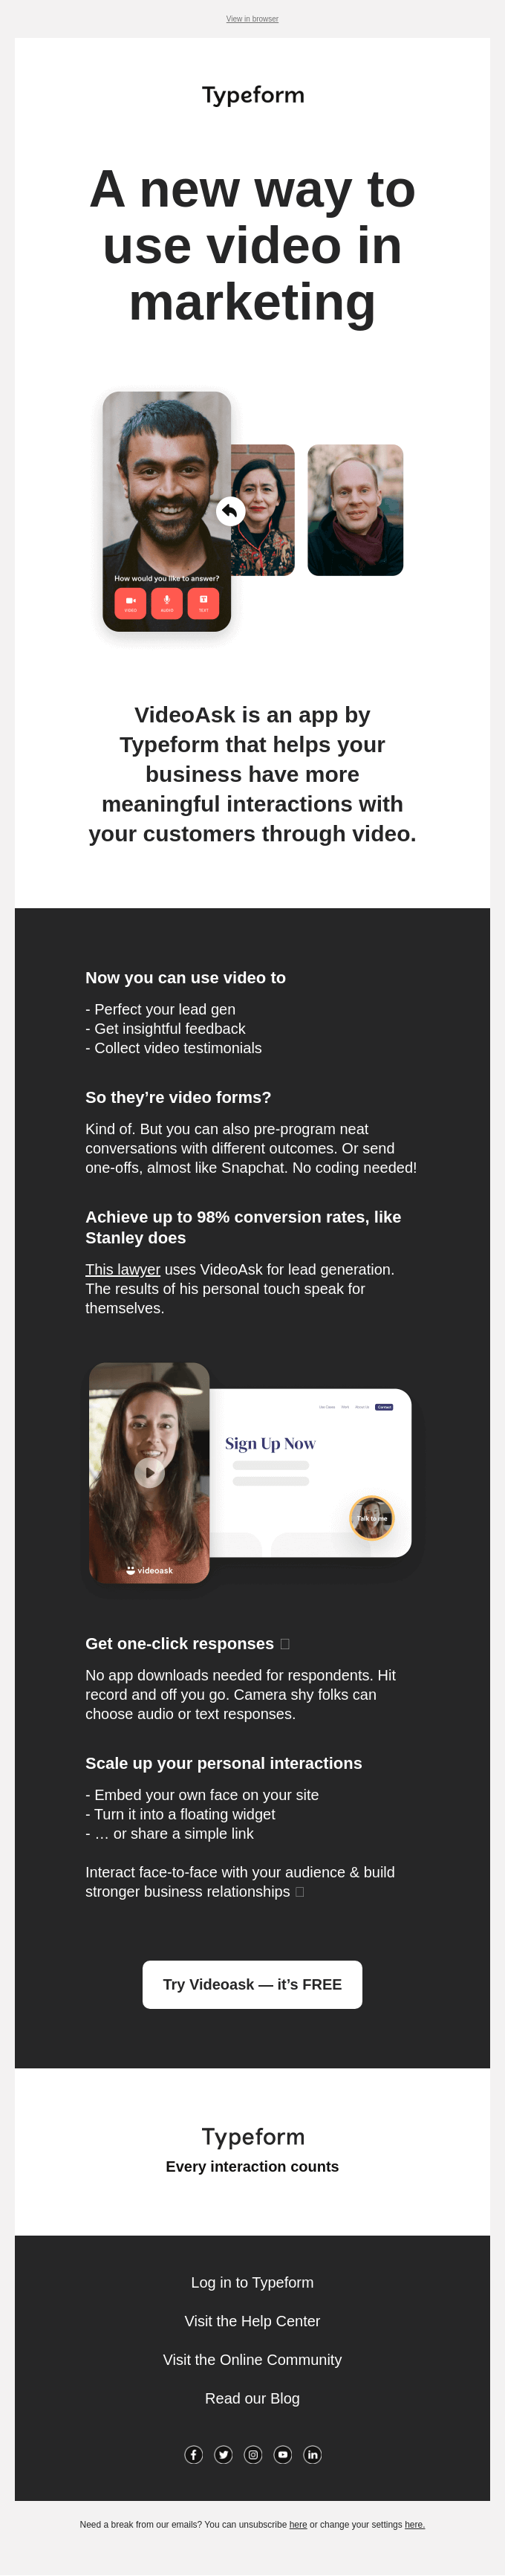 Have you heard of VideoAsk 💁‍♀️? - Typeform Email Newsletter